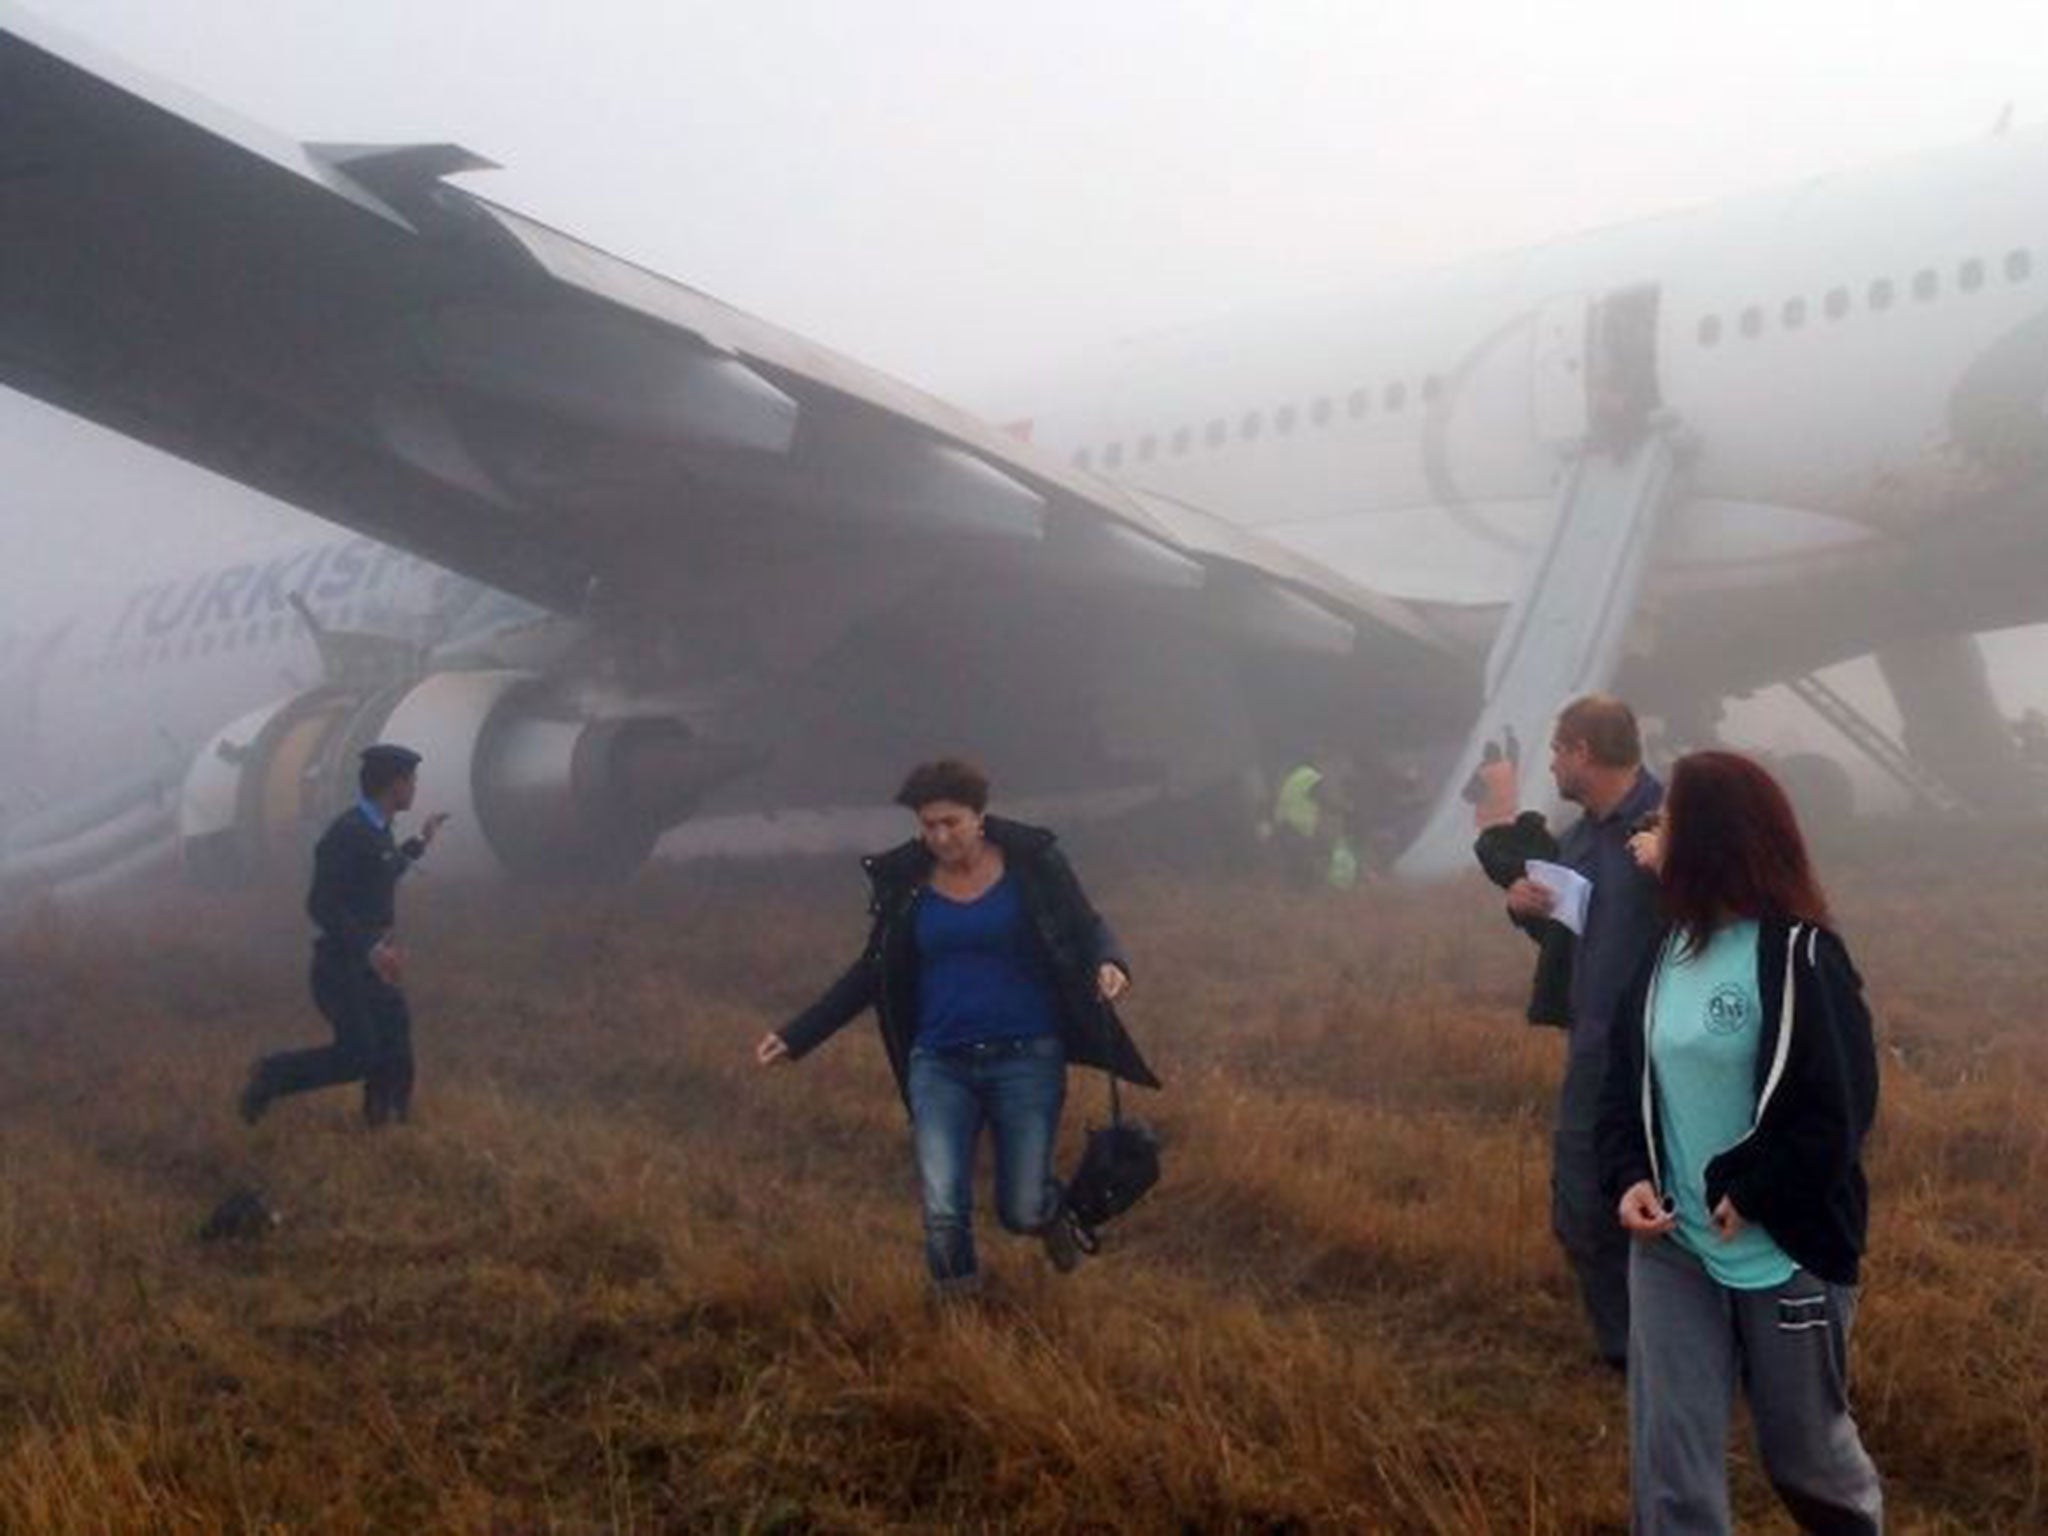 Passengers walk away from a Turkish Airlines plane after it skidded off the runway while landing at Kathmandu airport